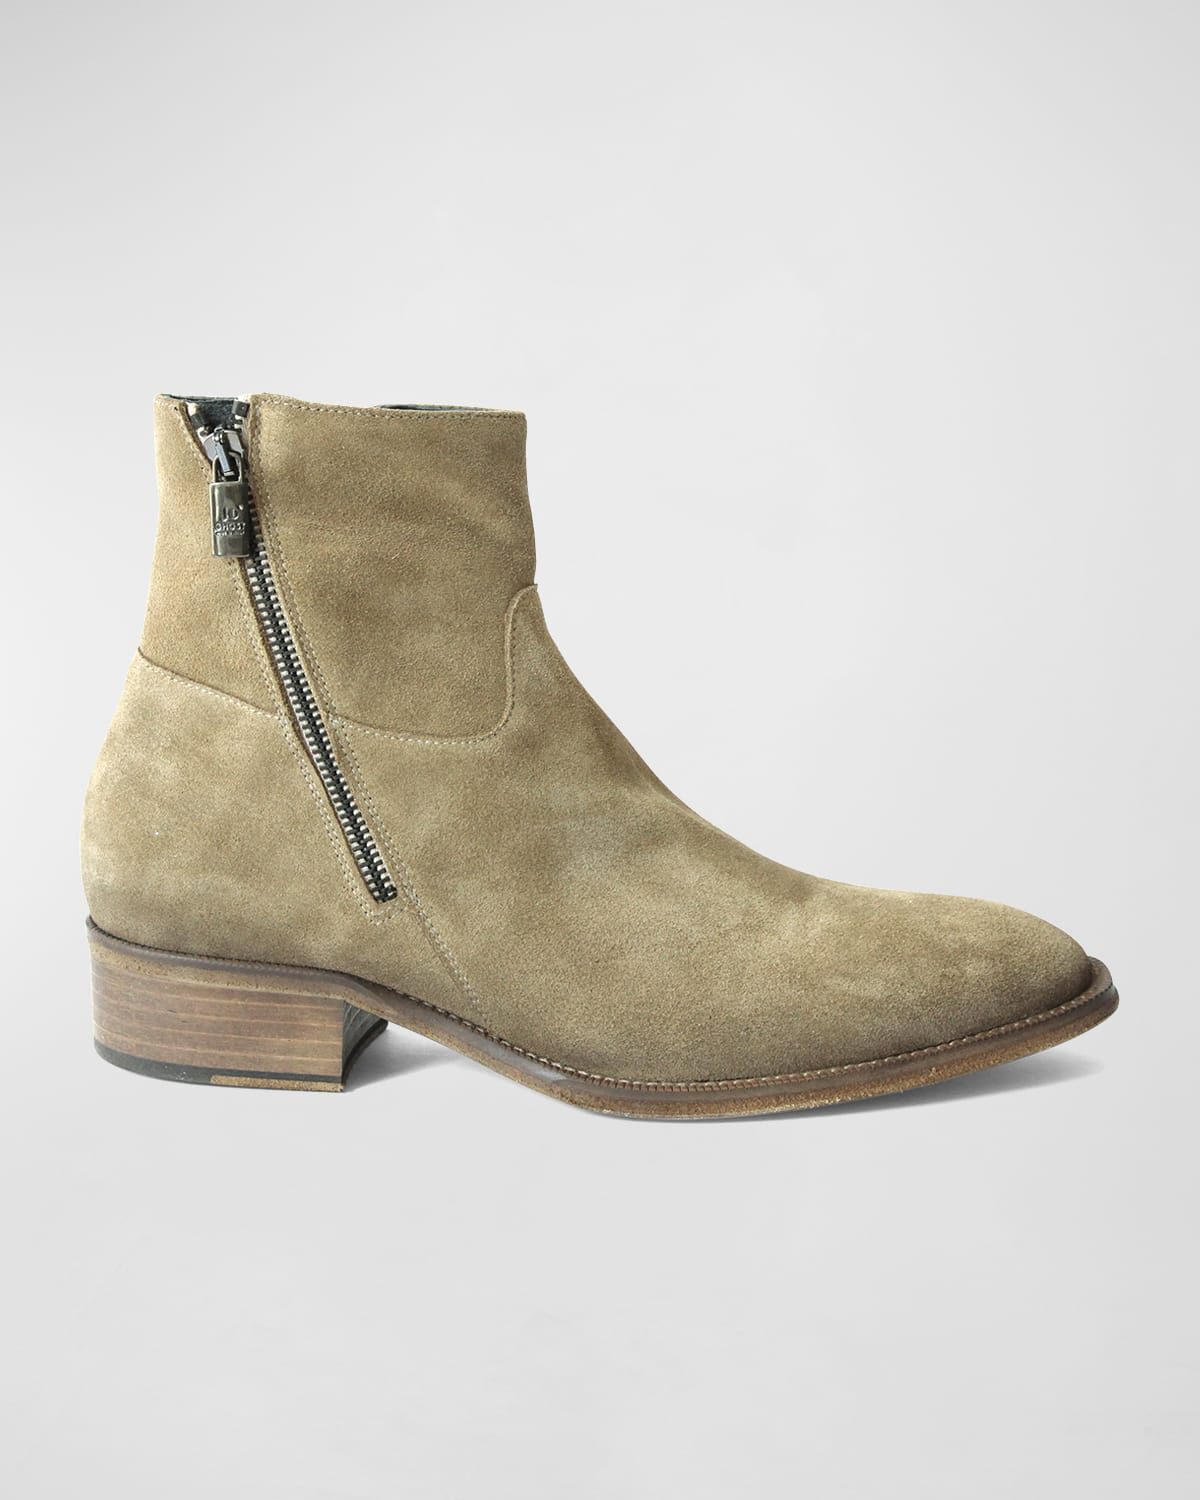 Almond Toe Ankle Boots | Neiman Marcus